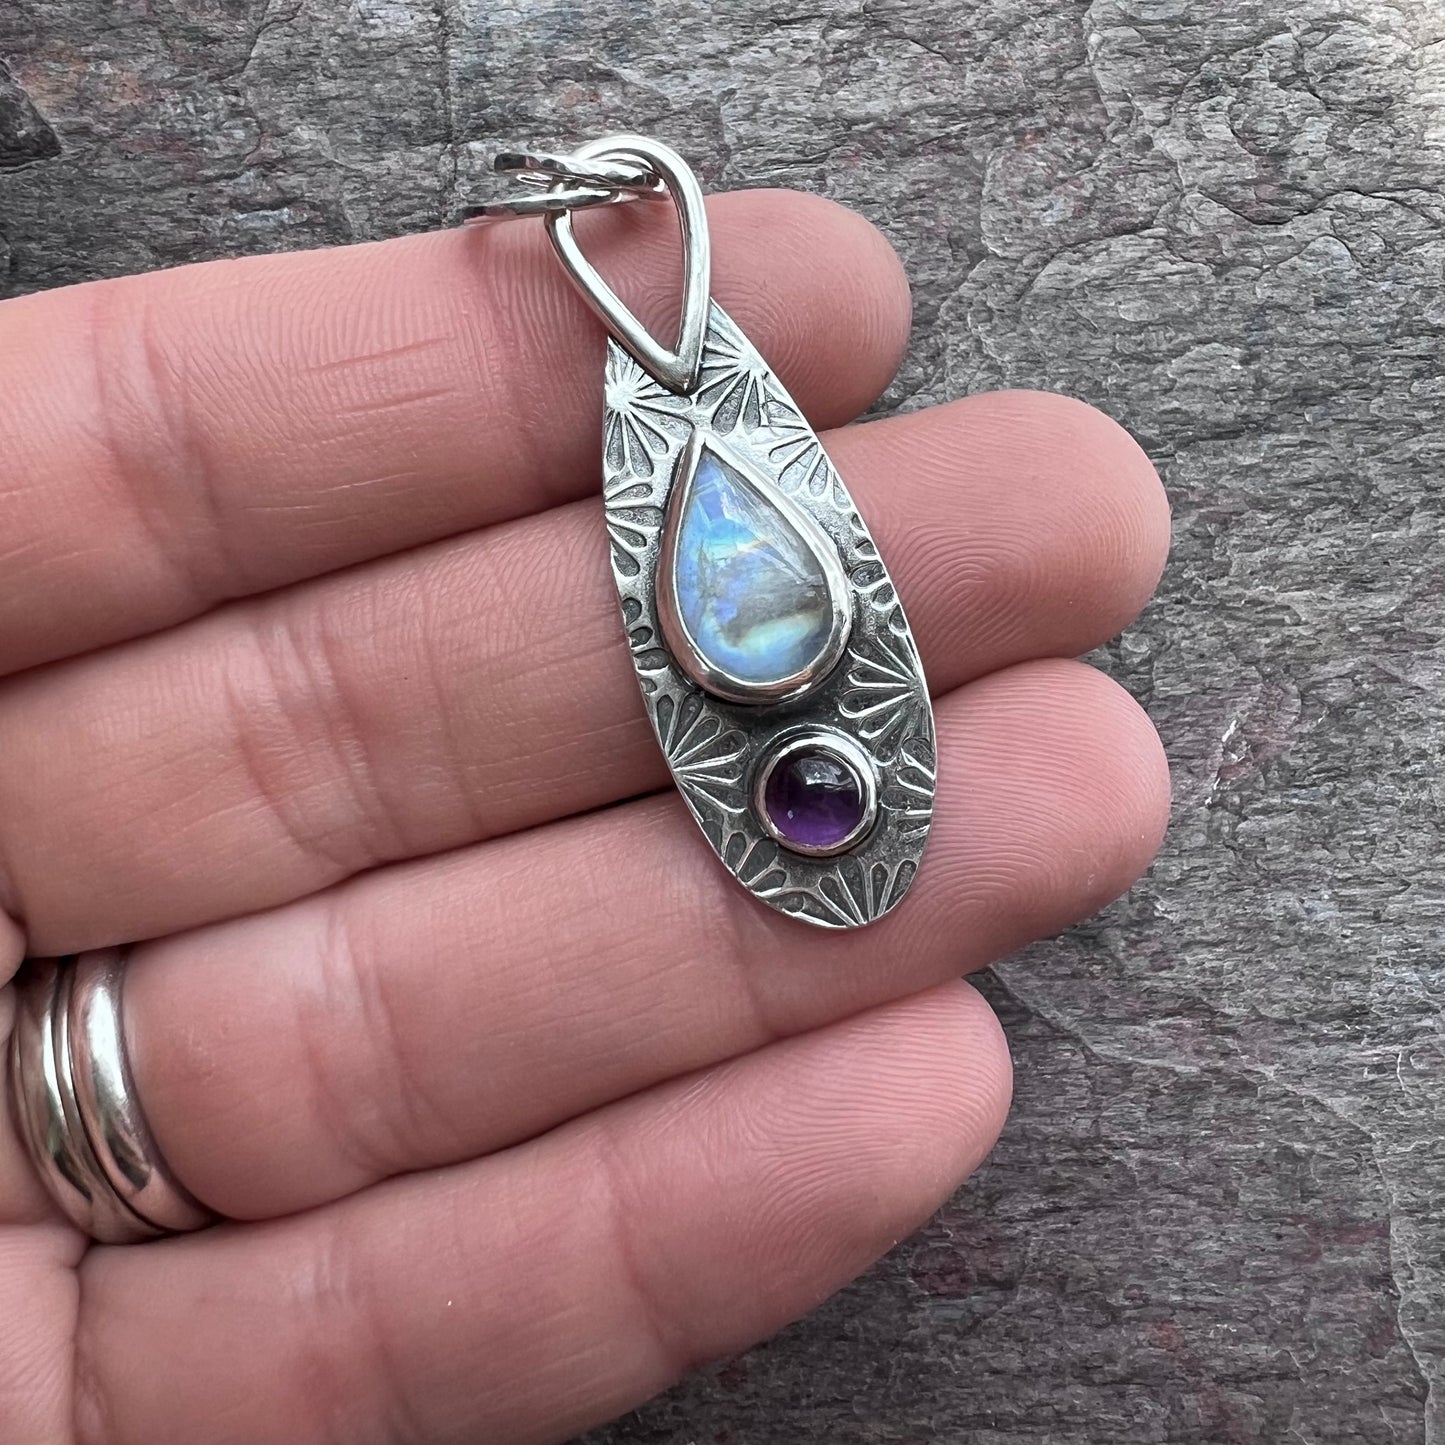 Rainbow Moonstone and Amethyst Sterling Silver Pendant - Handmade One-of-a-kind Pendant